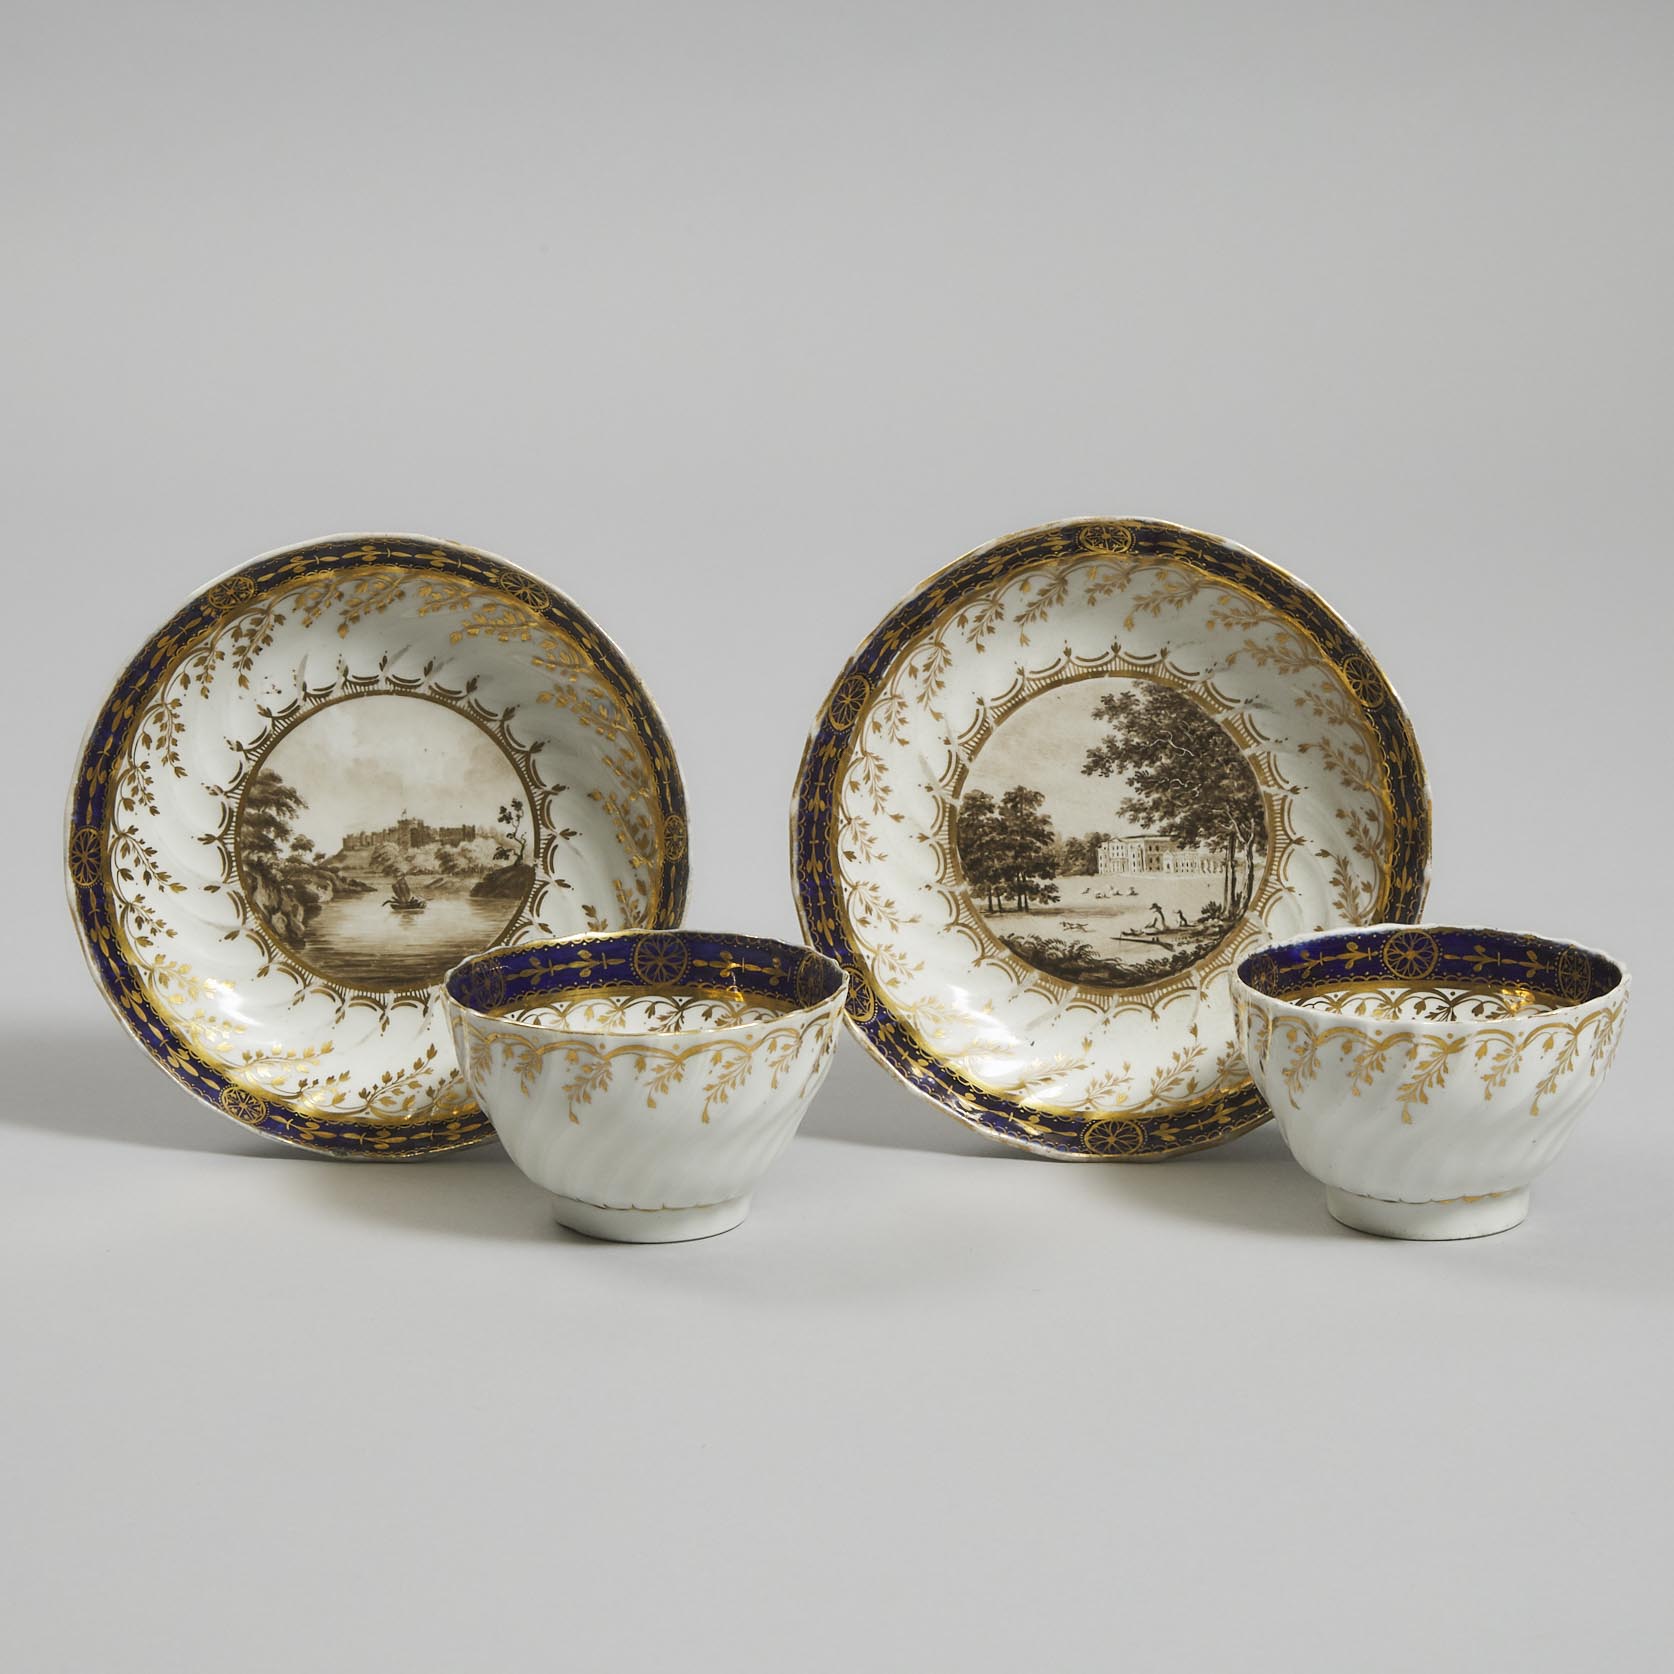 Pair of Chamberlains Worcester Fluted Tea Bowls and Saucers, c.1795